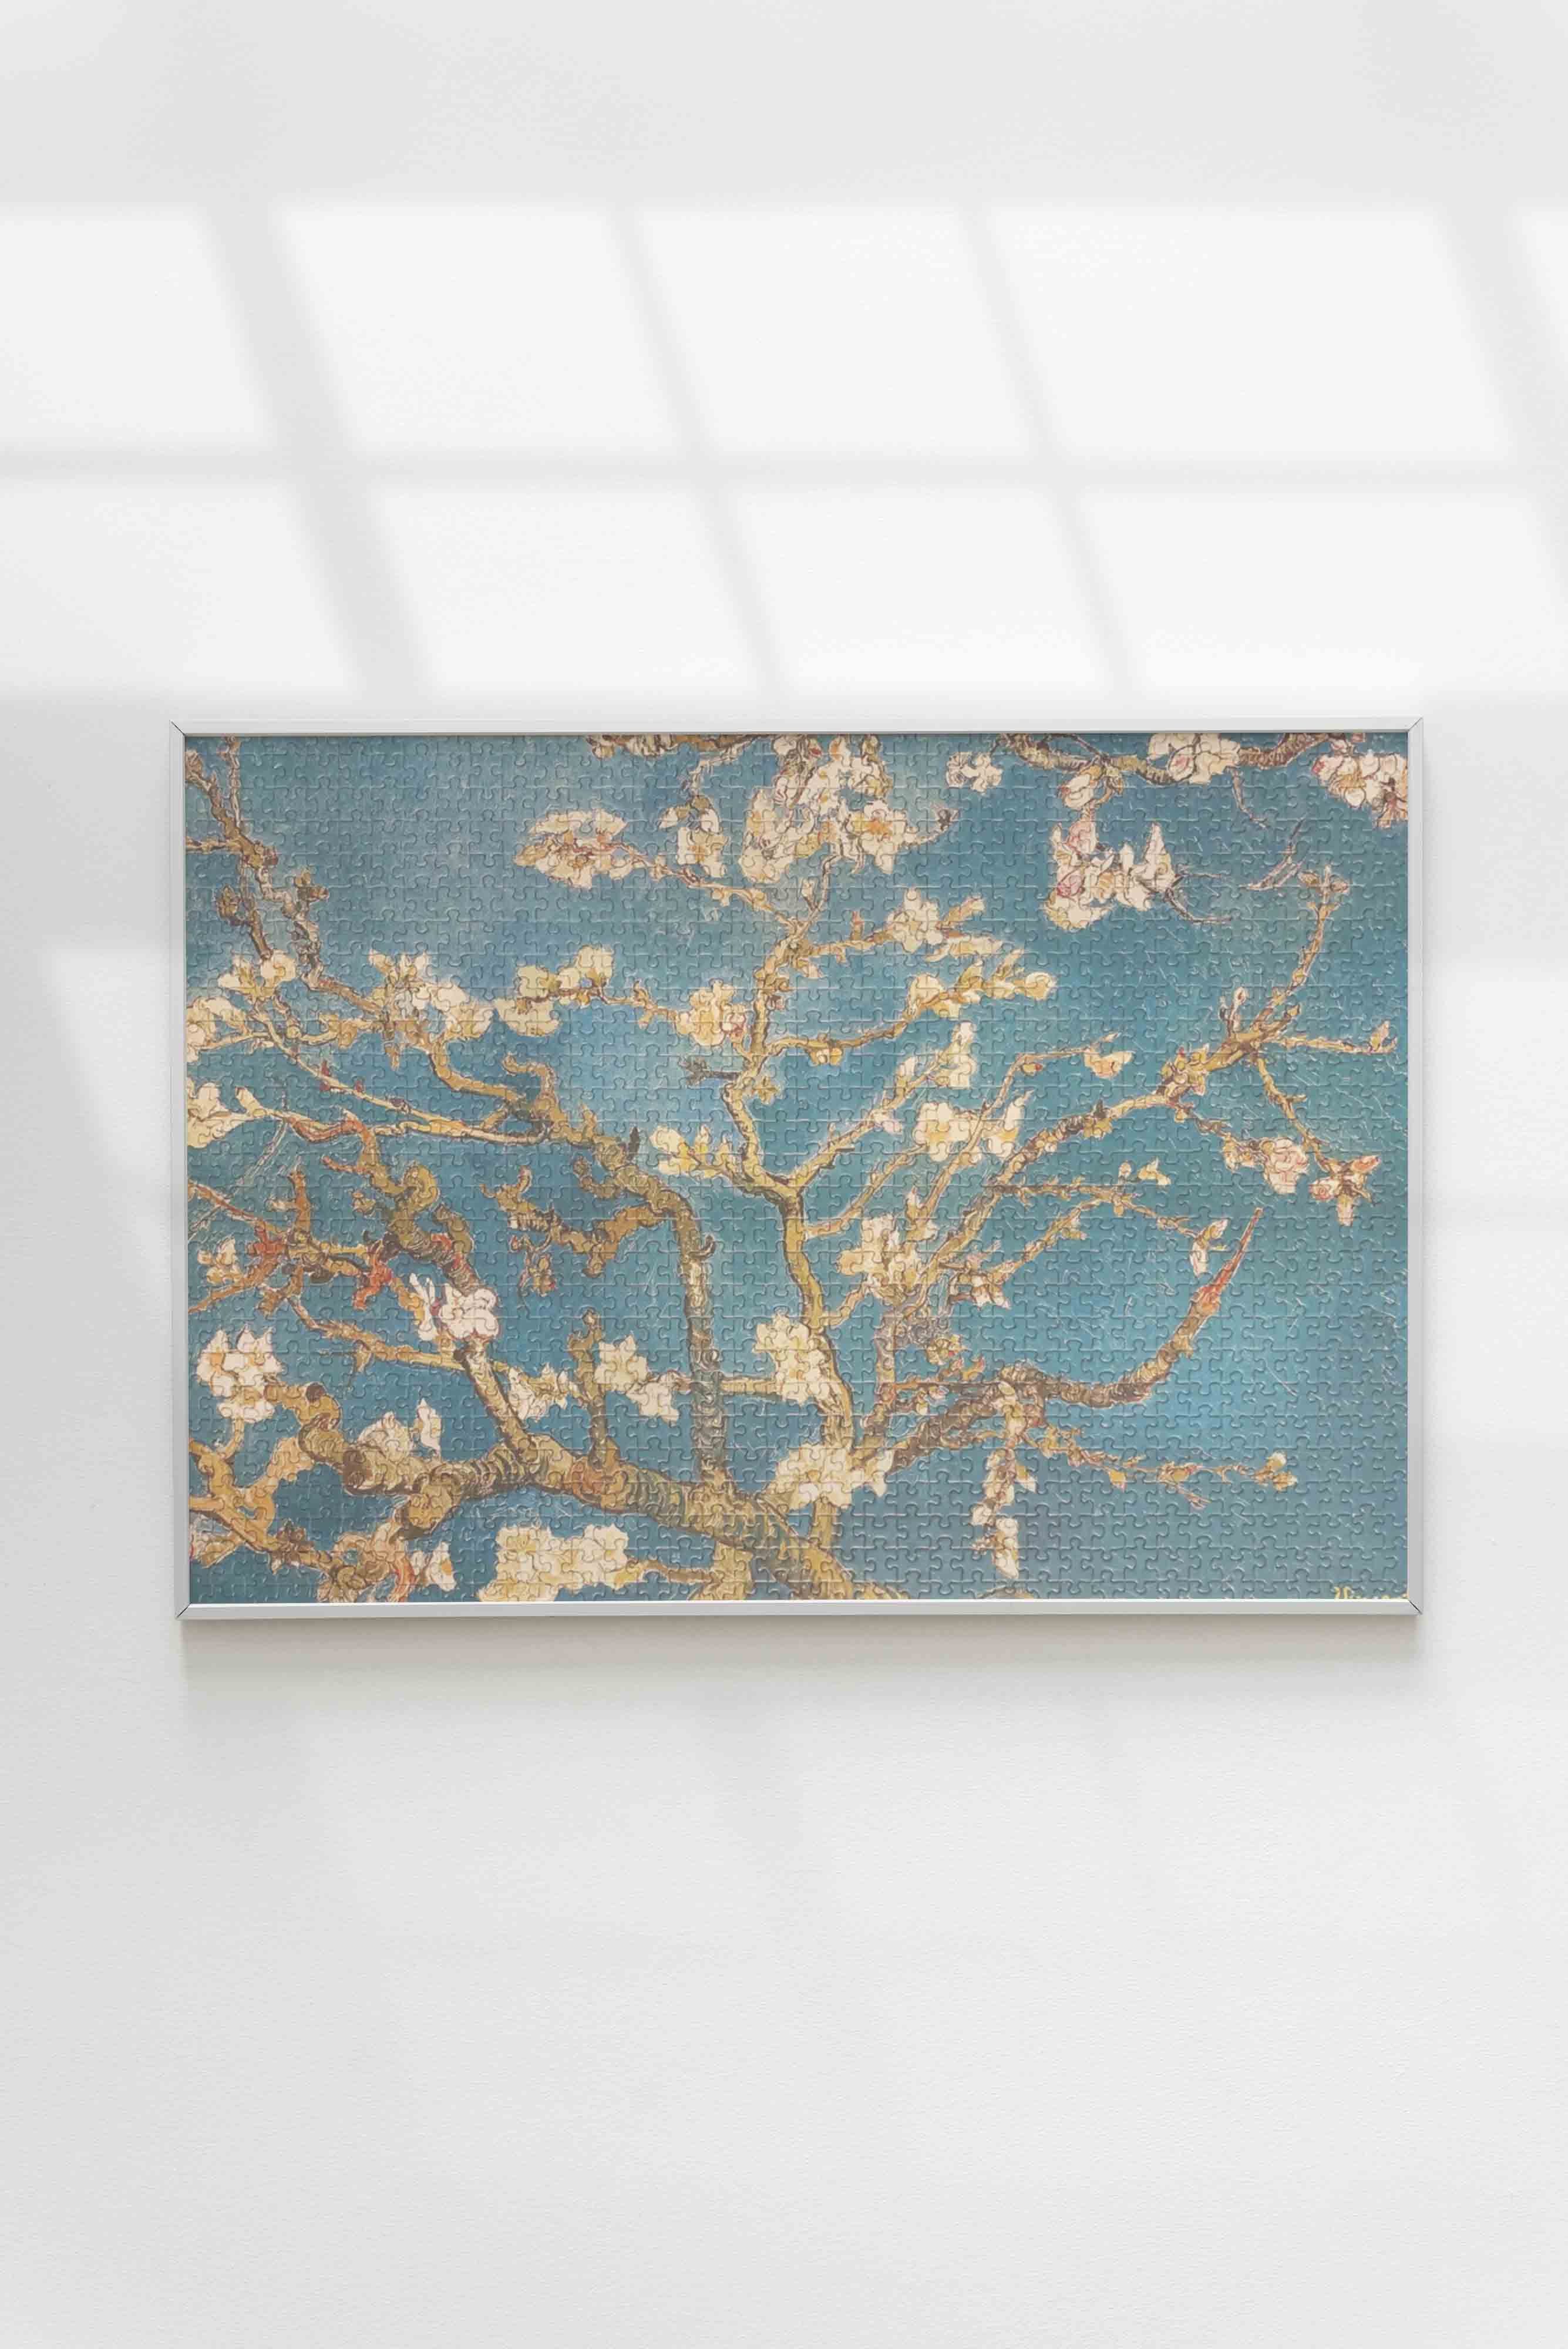 Vincent Van Gogh Almond Blossom Jigsaw Puzzle: 1000-Piece Puzzle Framed as Gallery Wall Art for Interior Design